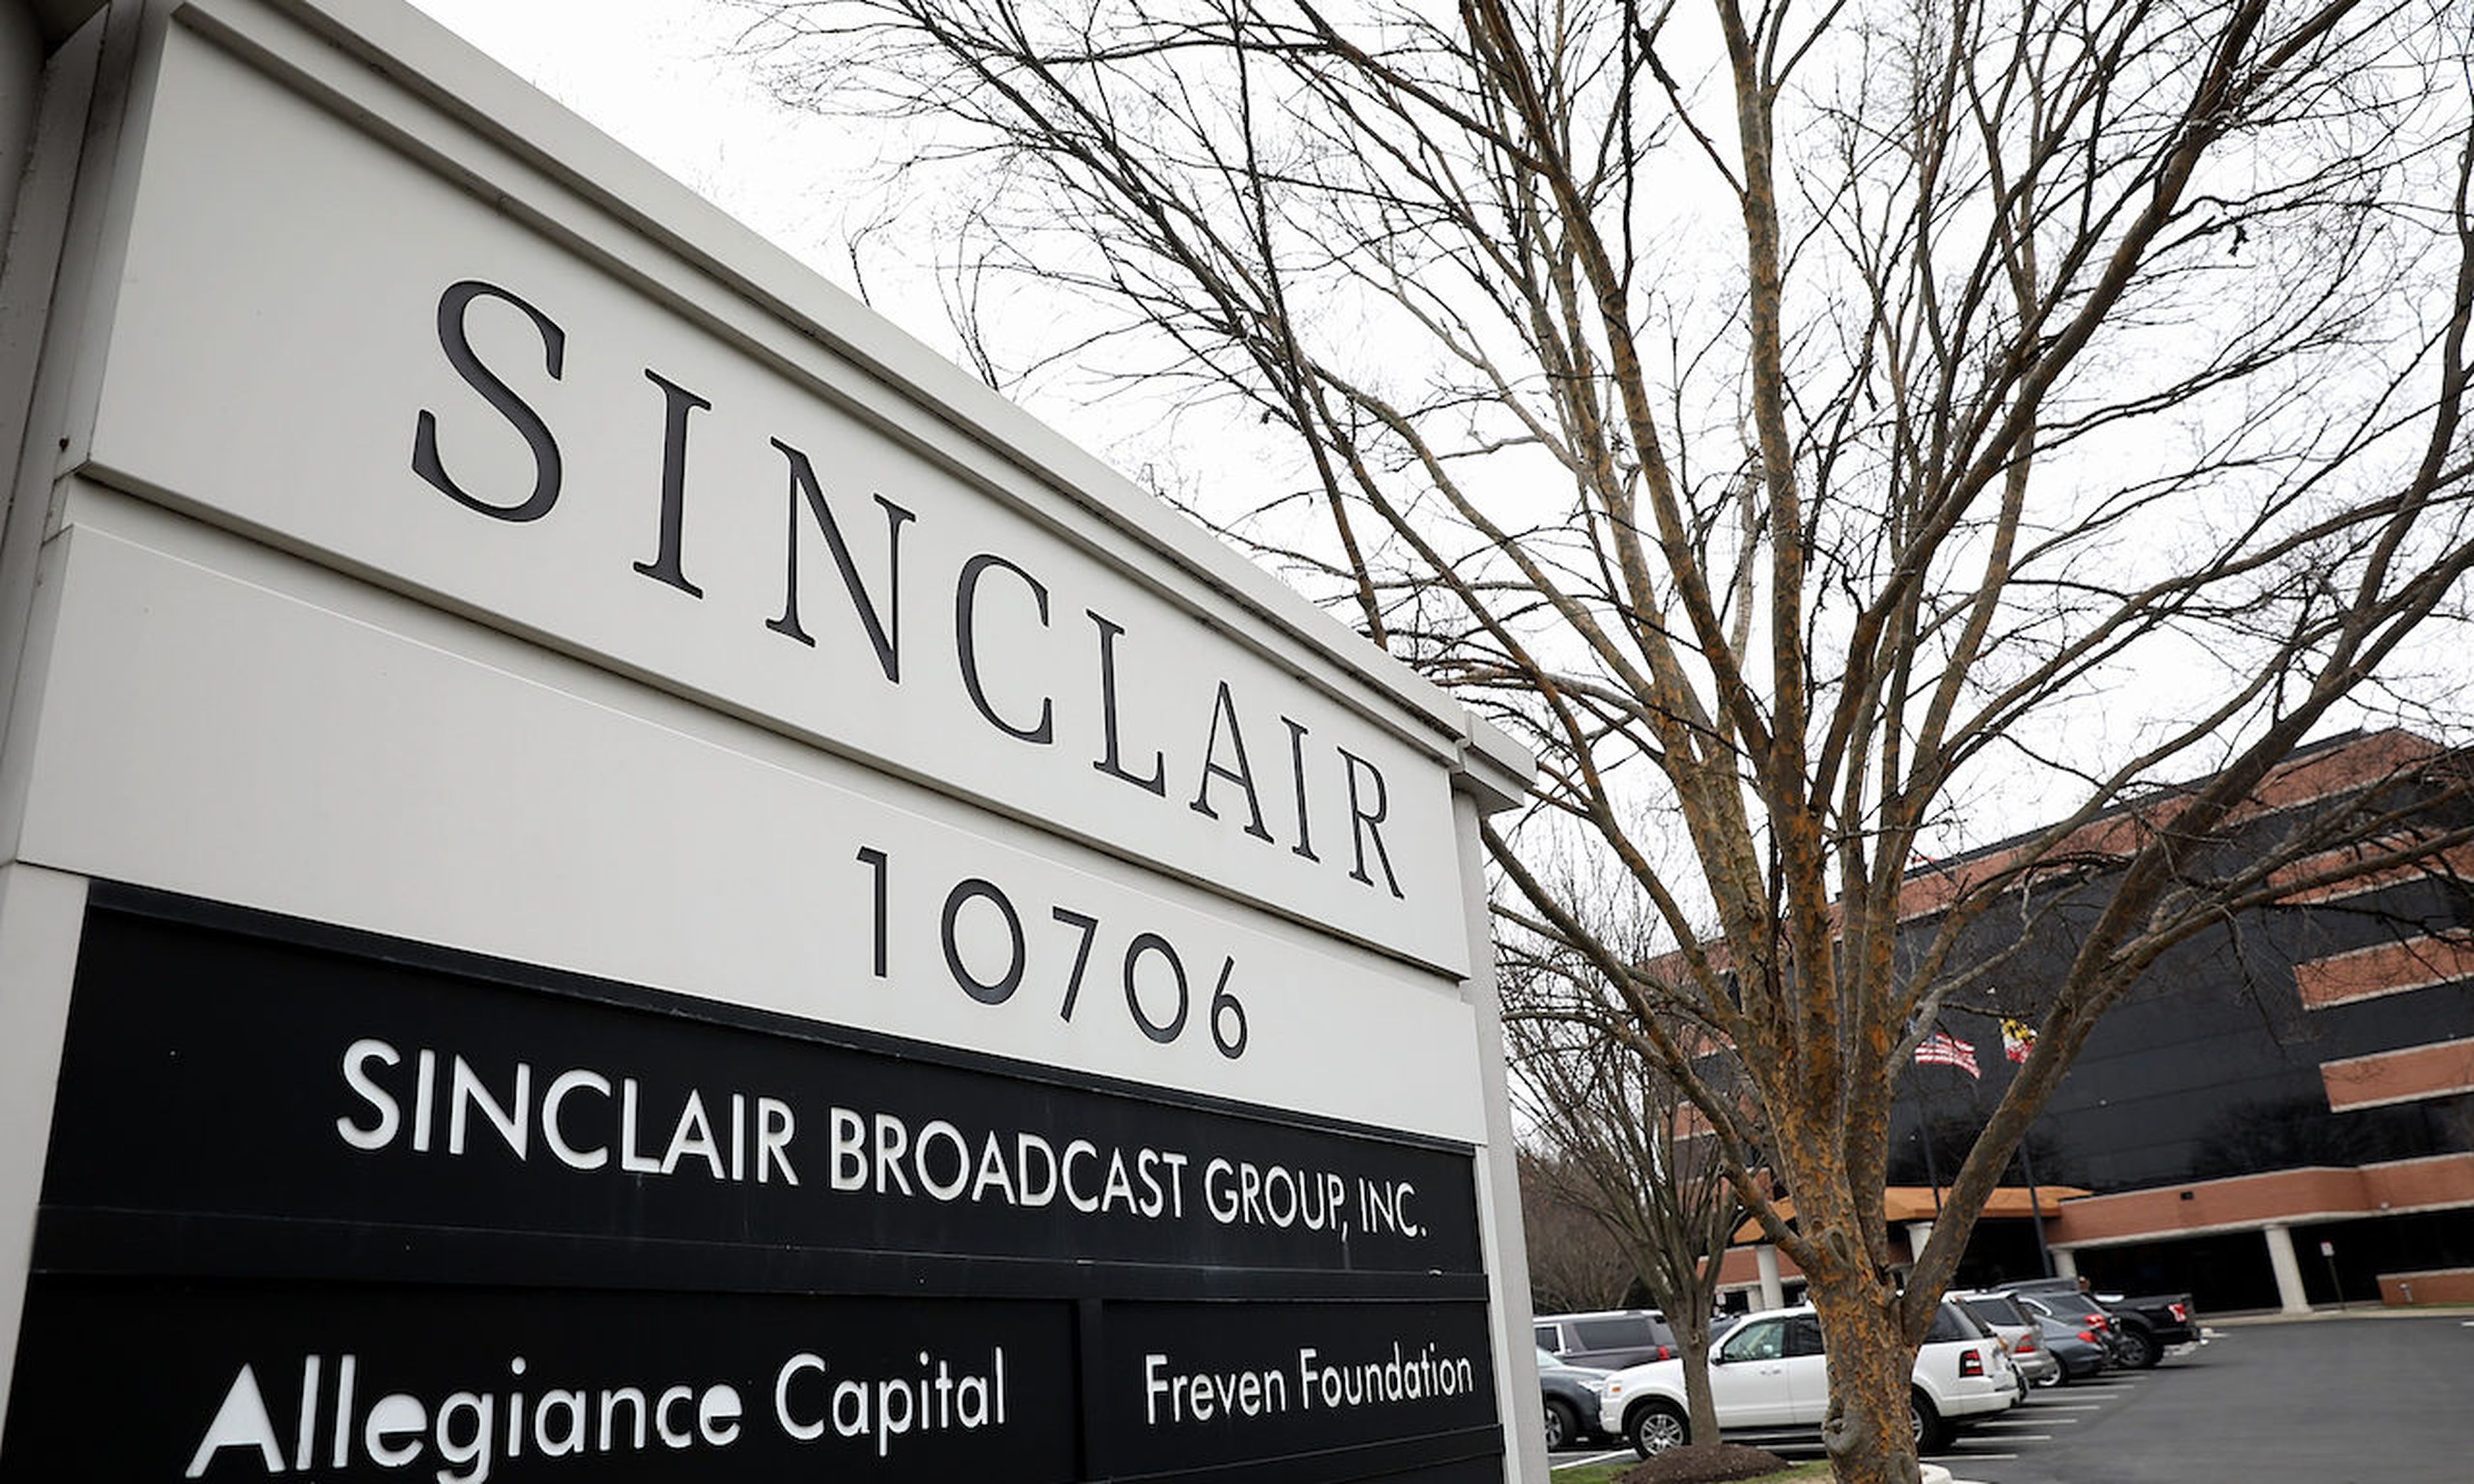 The headquarters of the Sinclair Broadcast Group is shown April 3, 2018 in Hunt Valley, Maryland. The company, the largest owner of local television stations in the United States, was hit by a ransomware attack over the weekend. (Photo by Win McNamee/Getty Images)